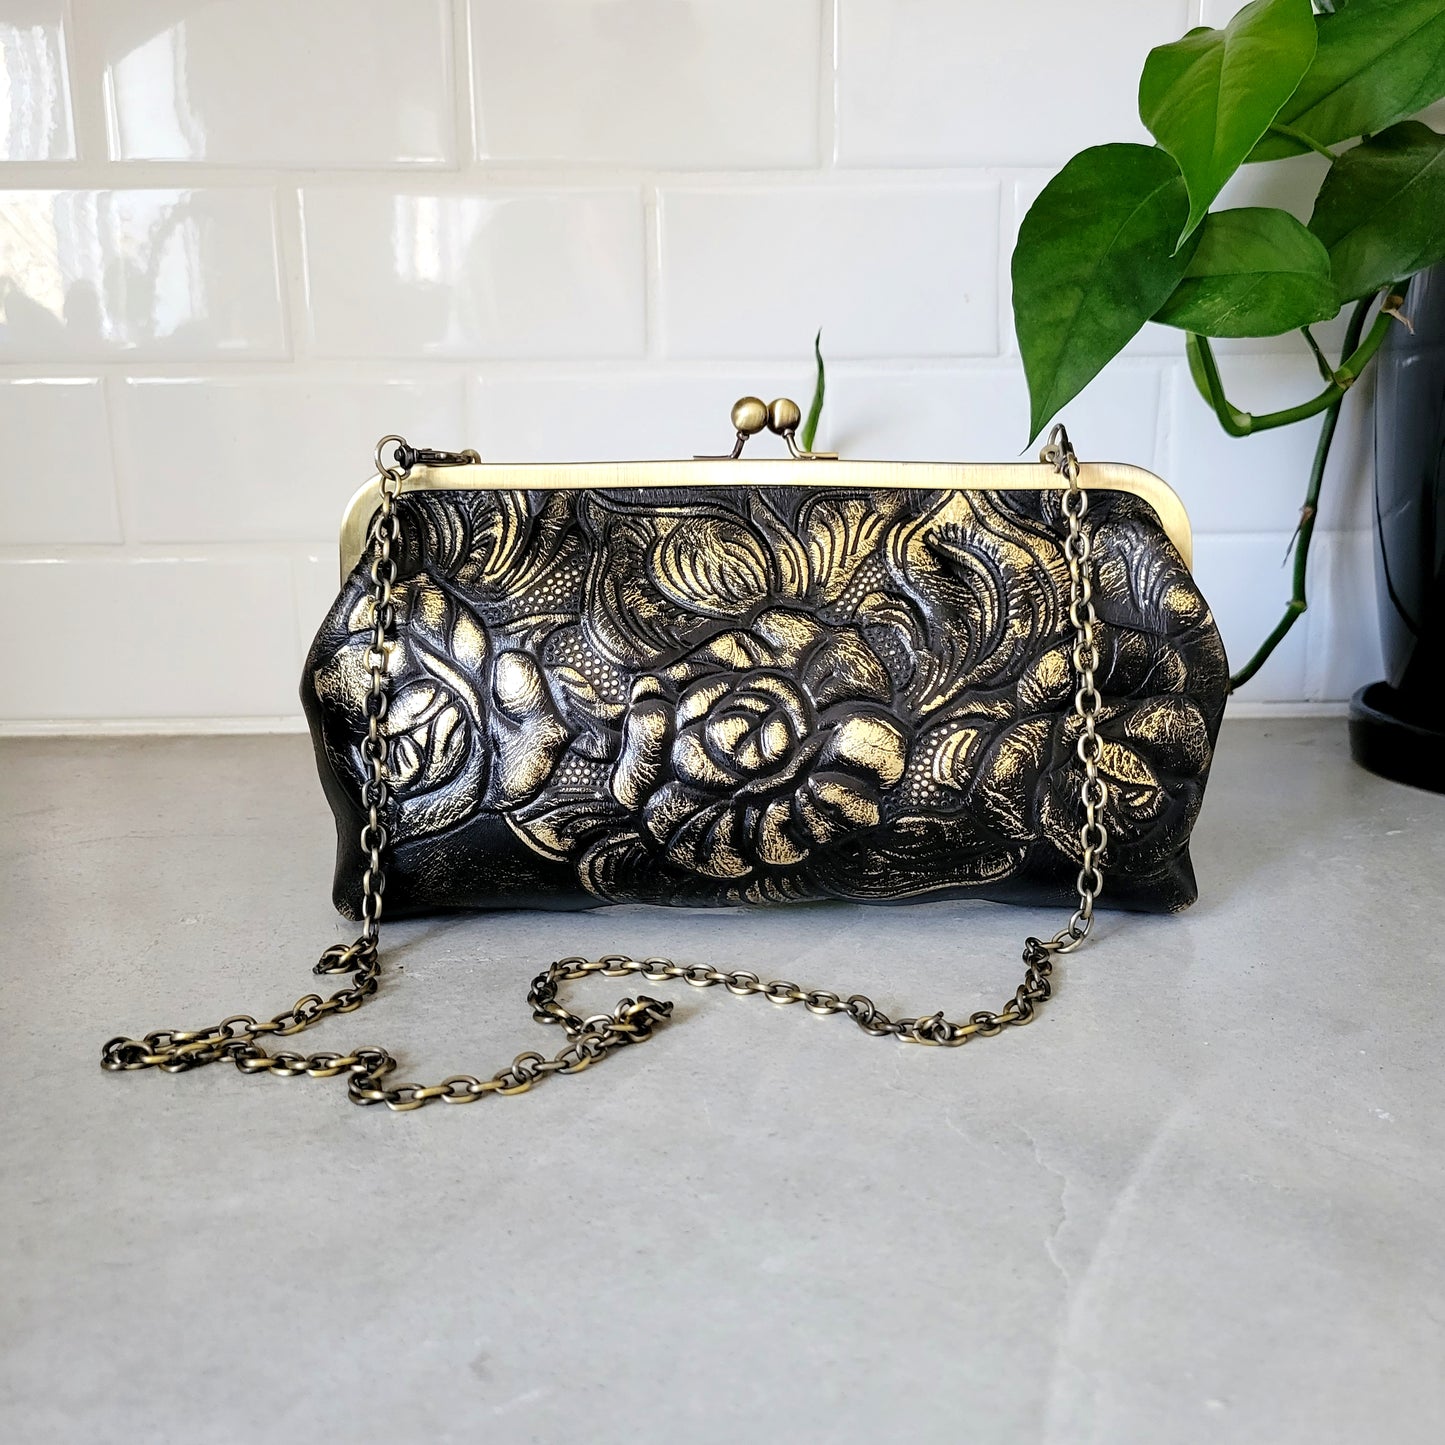 Vintage Patricia Nash Italian Tooled Leather Purse with Metal Strap